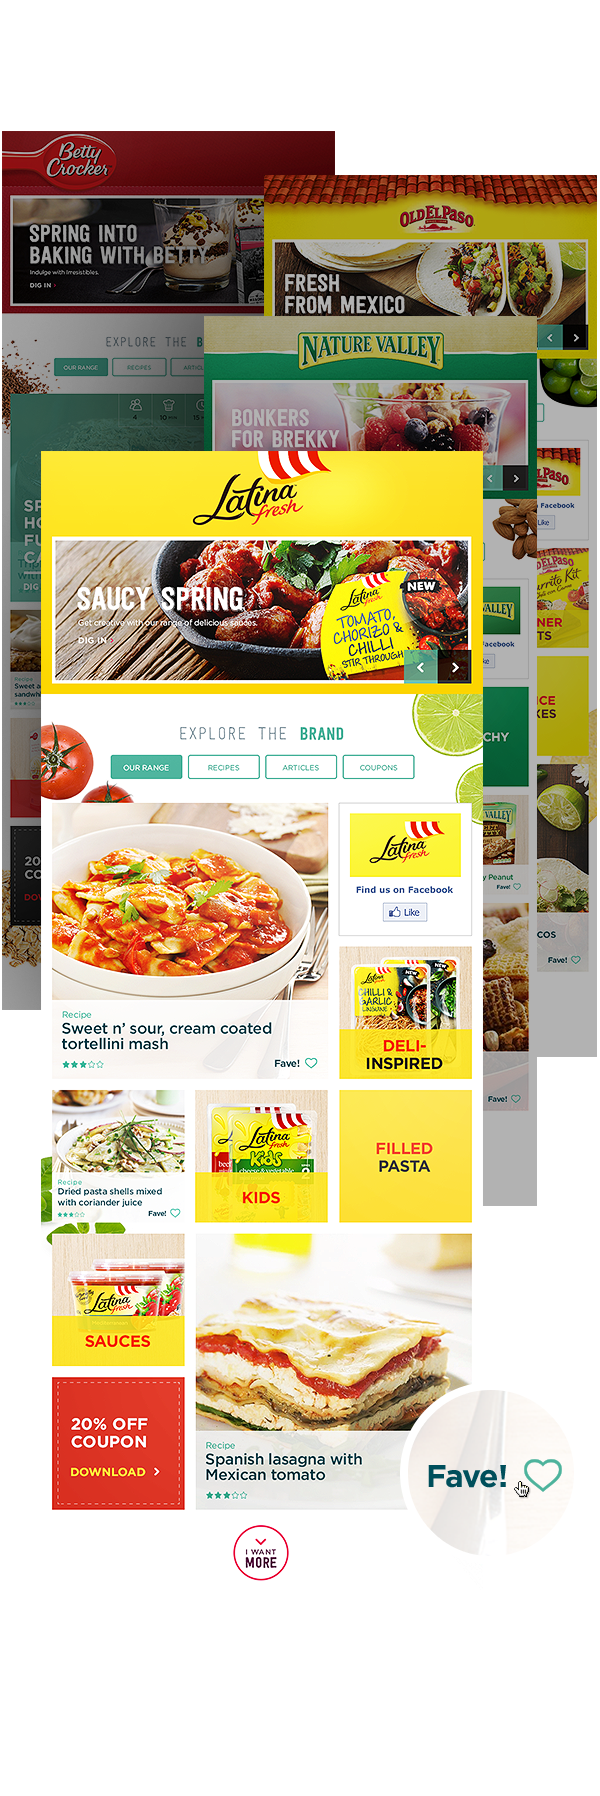 Food  table interactive ux UI Website Responsive design tablet mobile Shopping html5 css3 Web